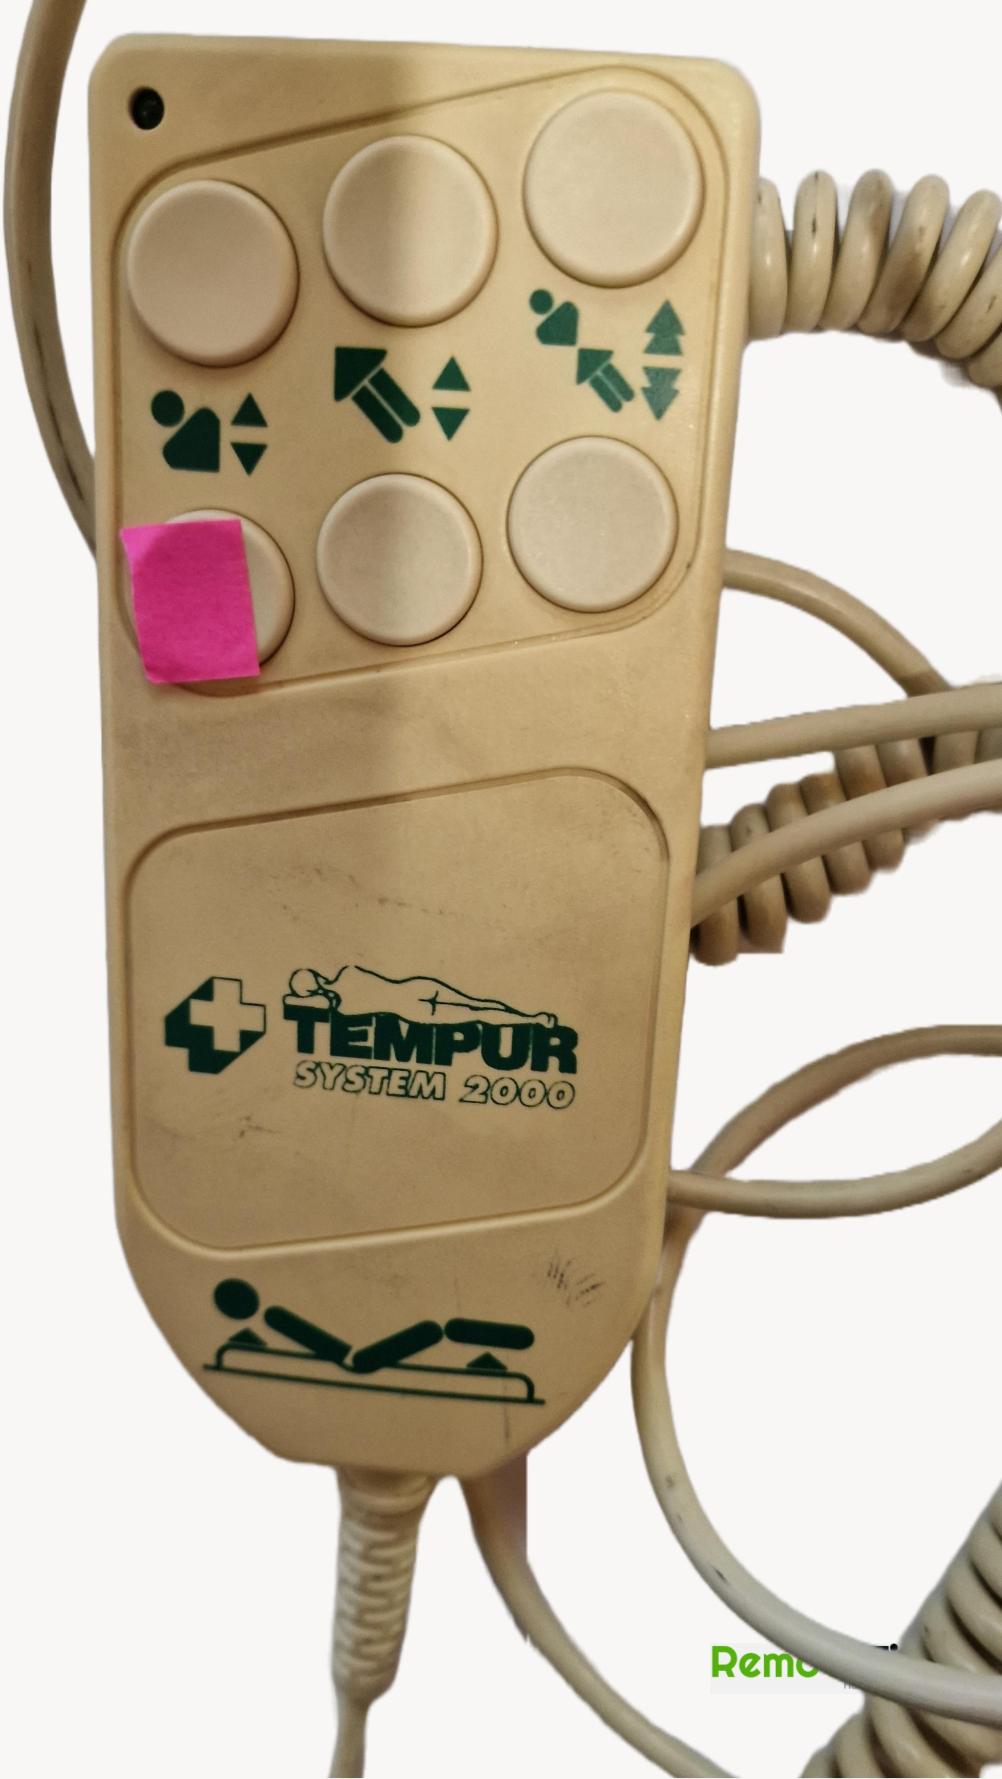 Tempur  System 2000 Remote Control - Front Image